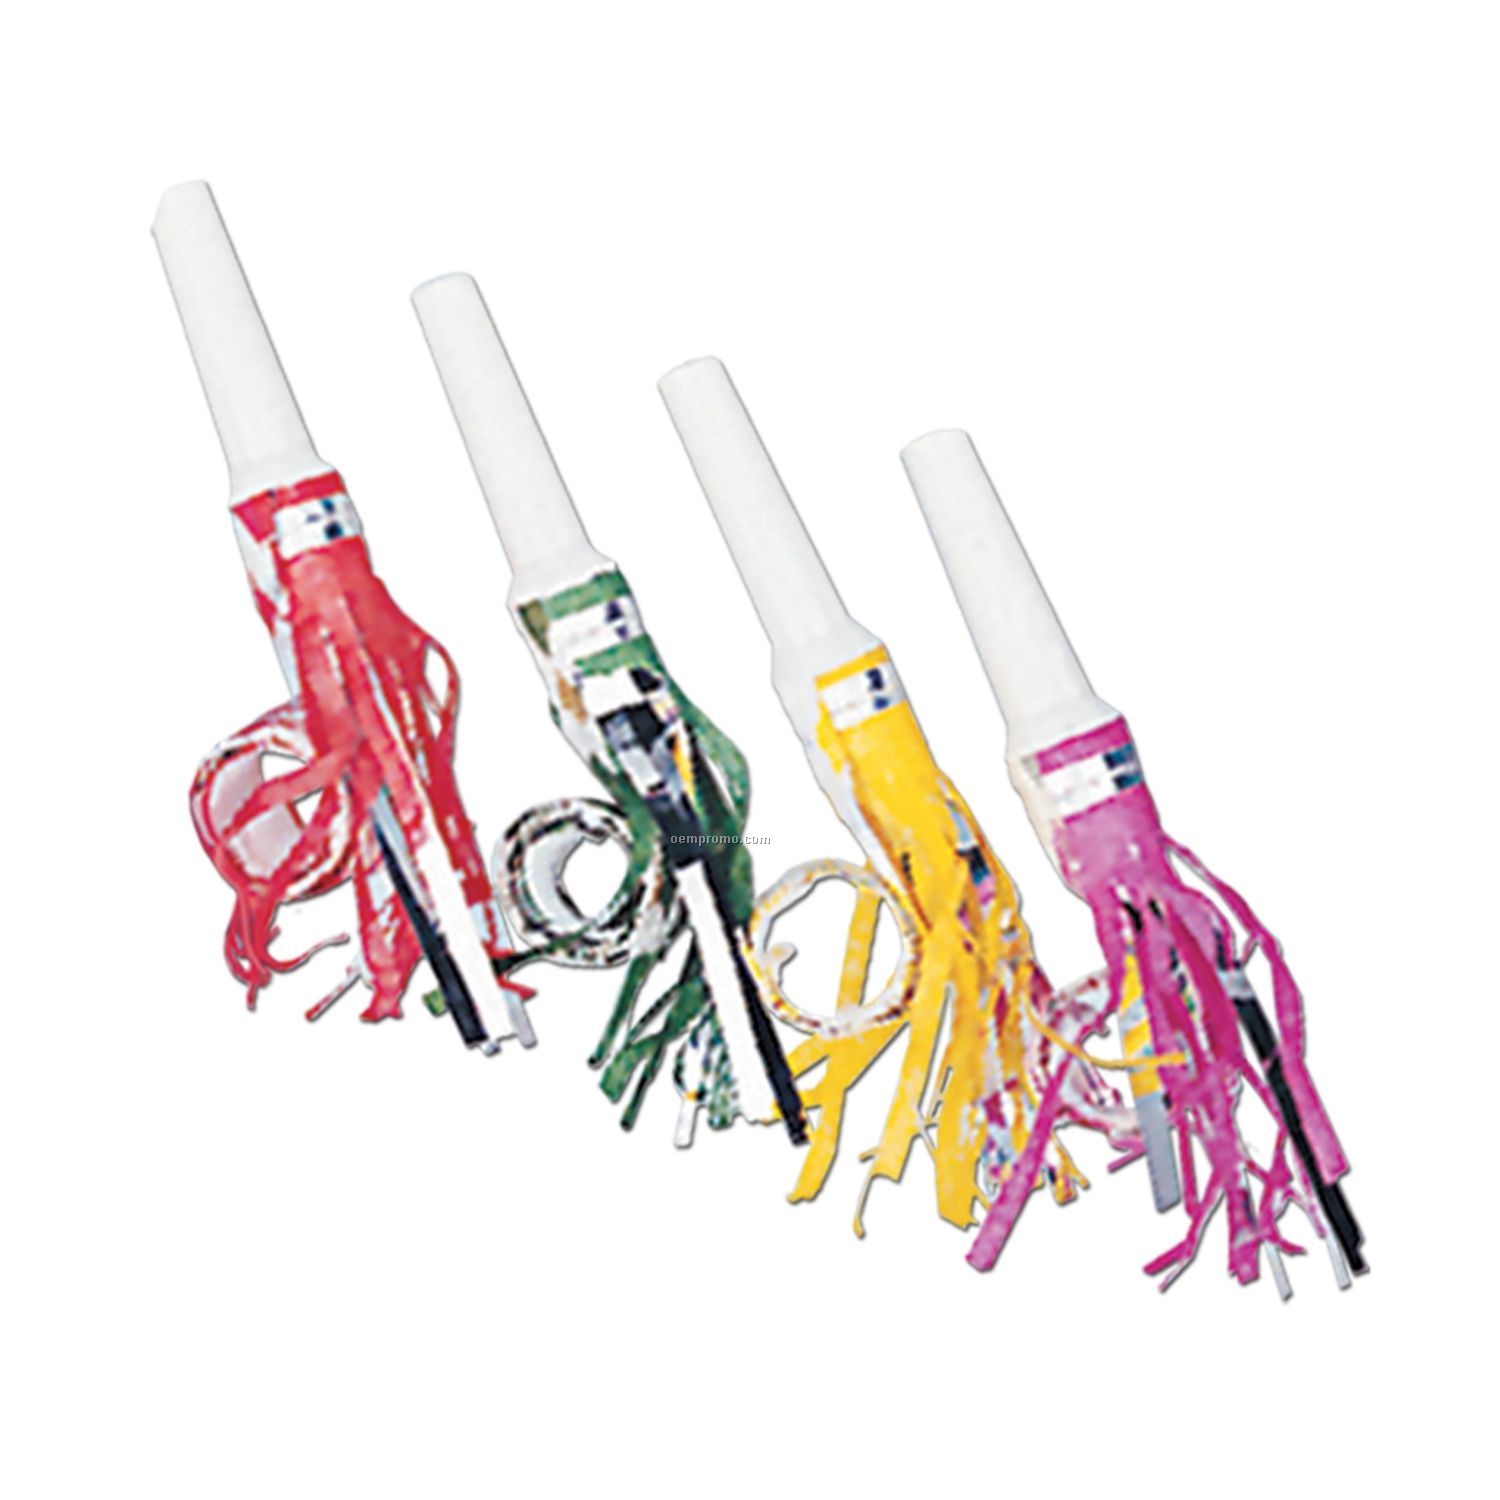 Fringed Party Blowout Noise Makers